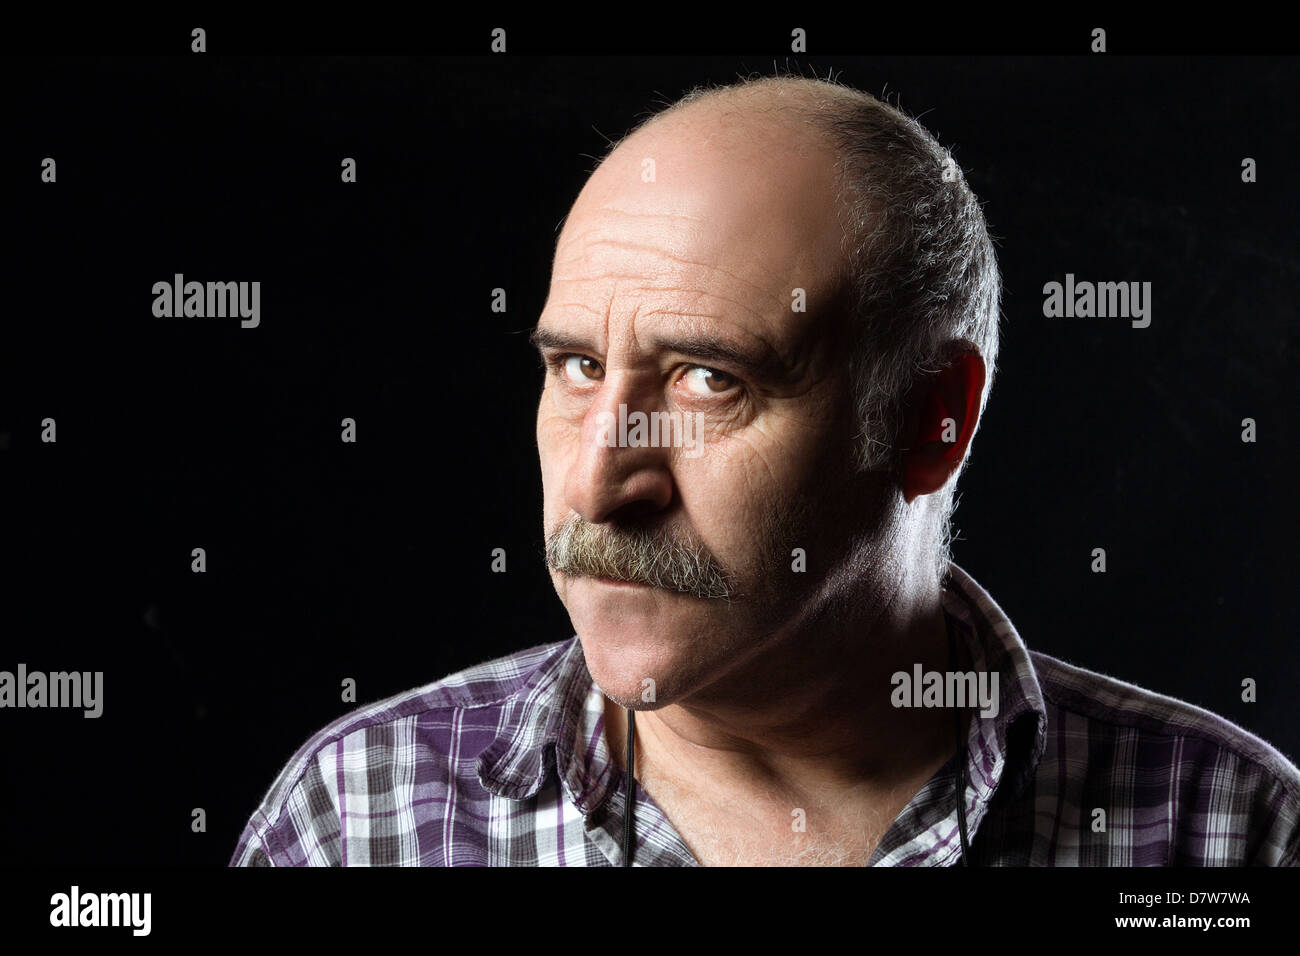 Annoyed bald man with a big mustache expressing anger Stock Photo